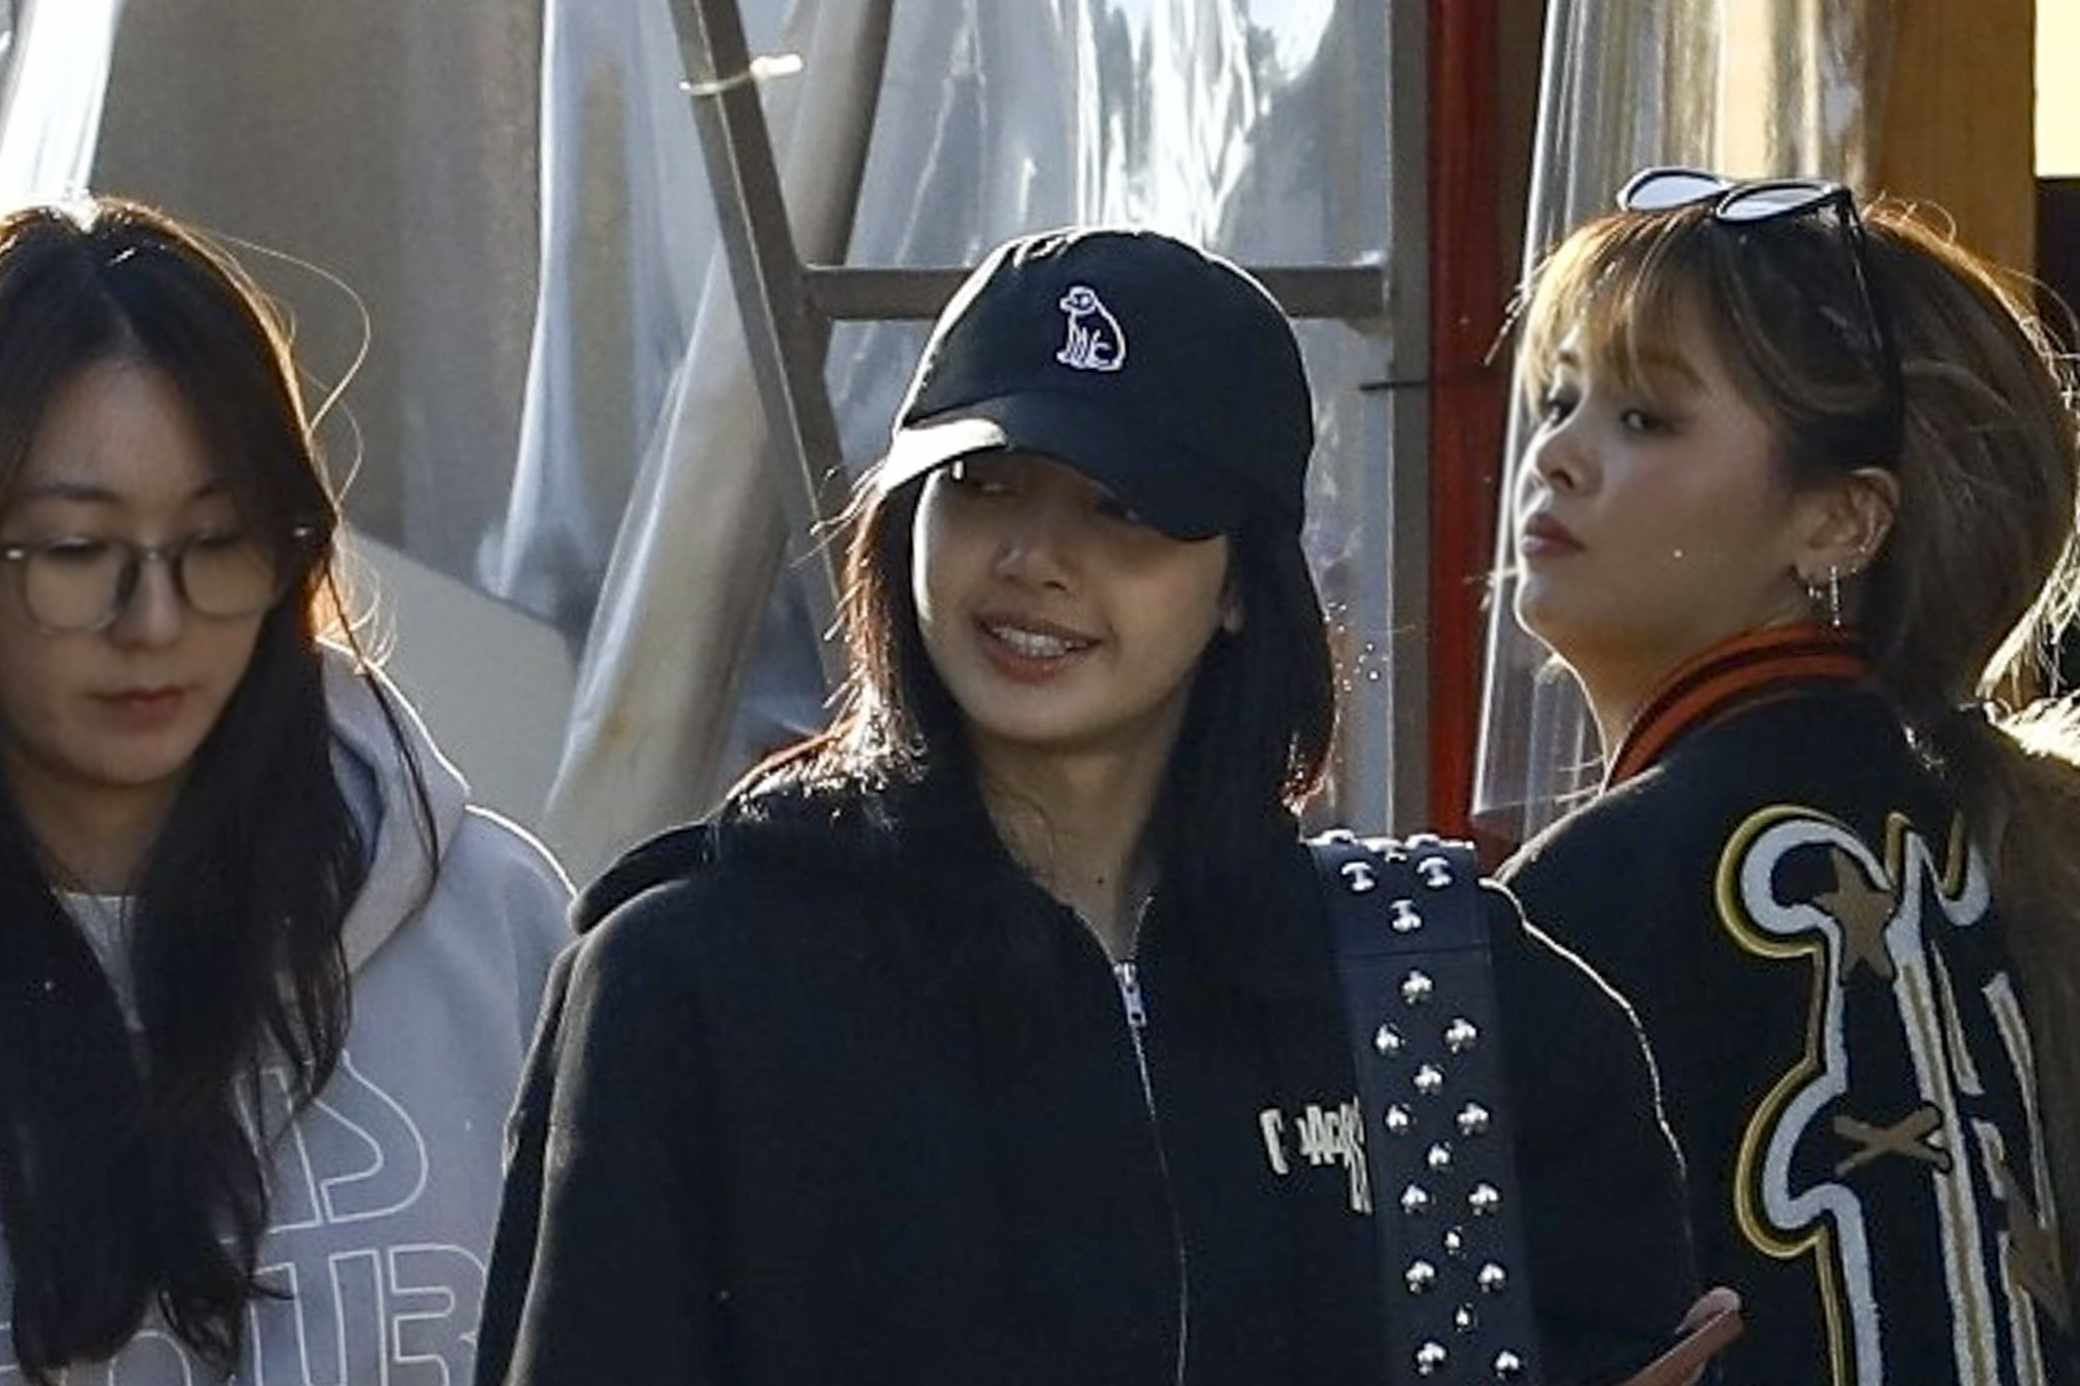 Lisa from BLACKPINK wears a black cap, Coachella 2024 hoodie, blue jeans, and white sneakers in beverly hills